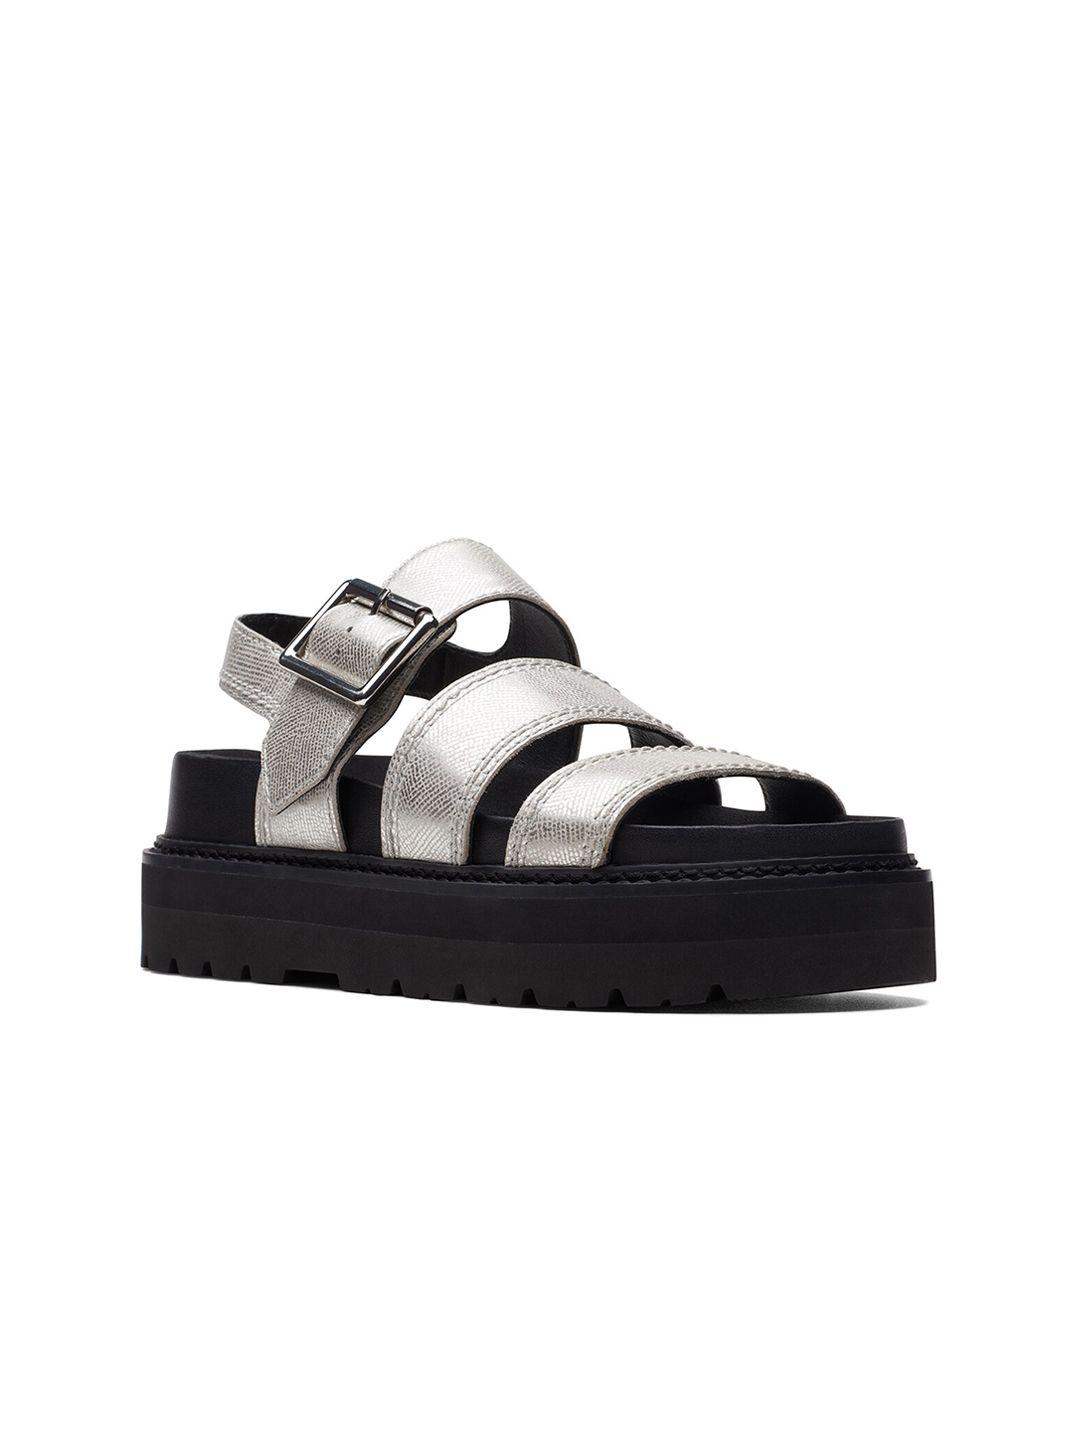 clarks-leather-flatform-sandals-with-buckles